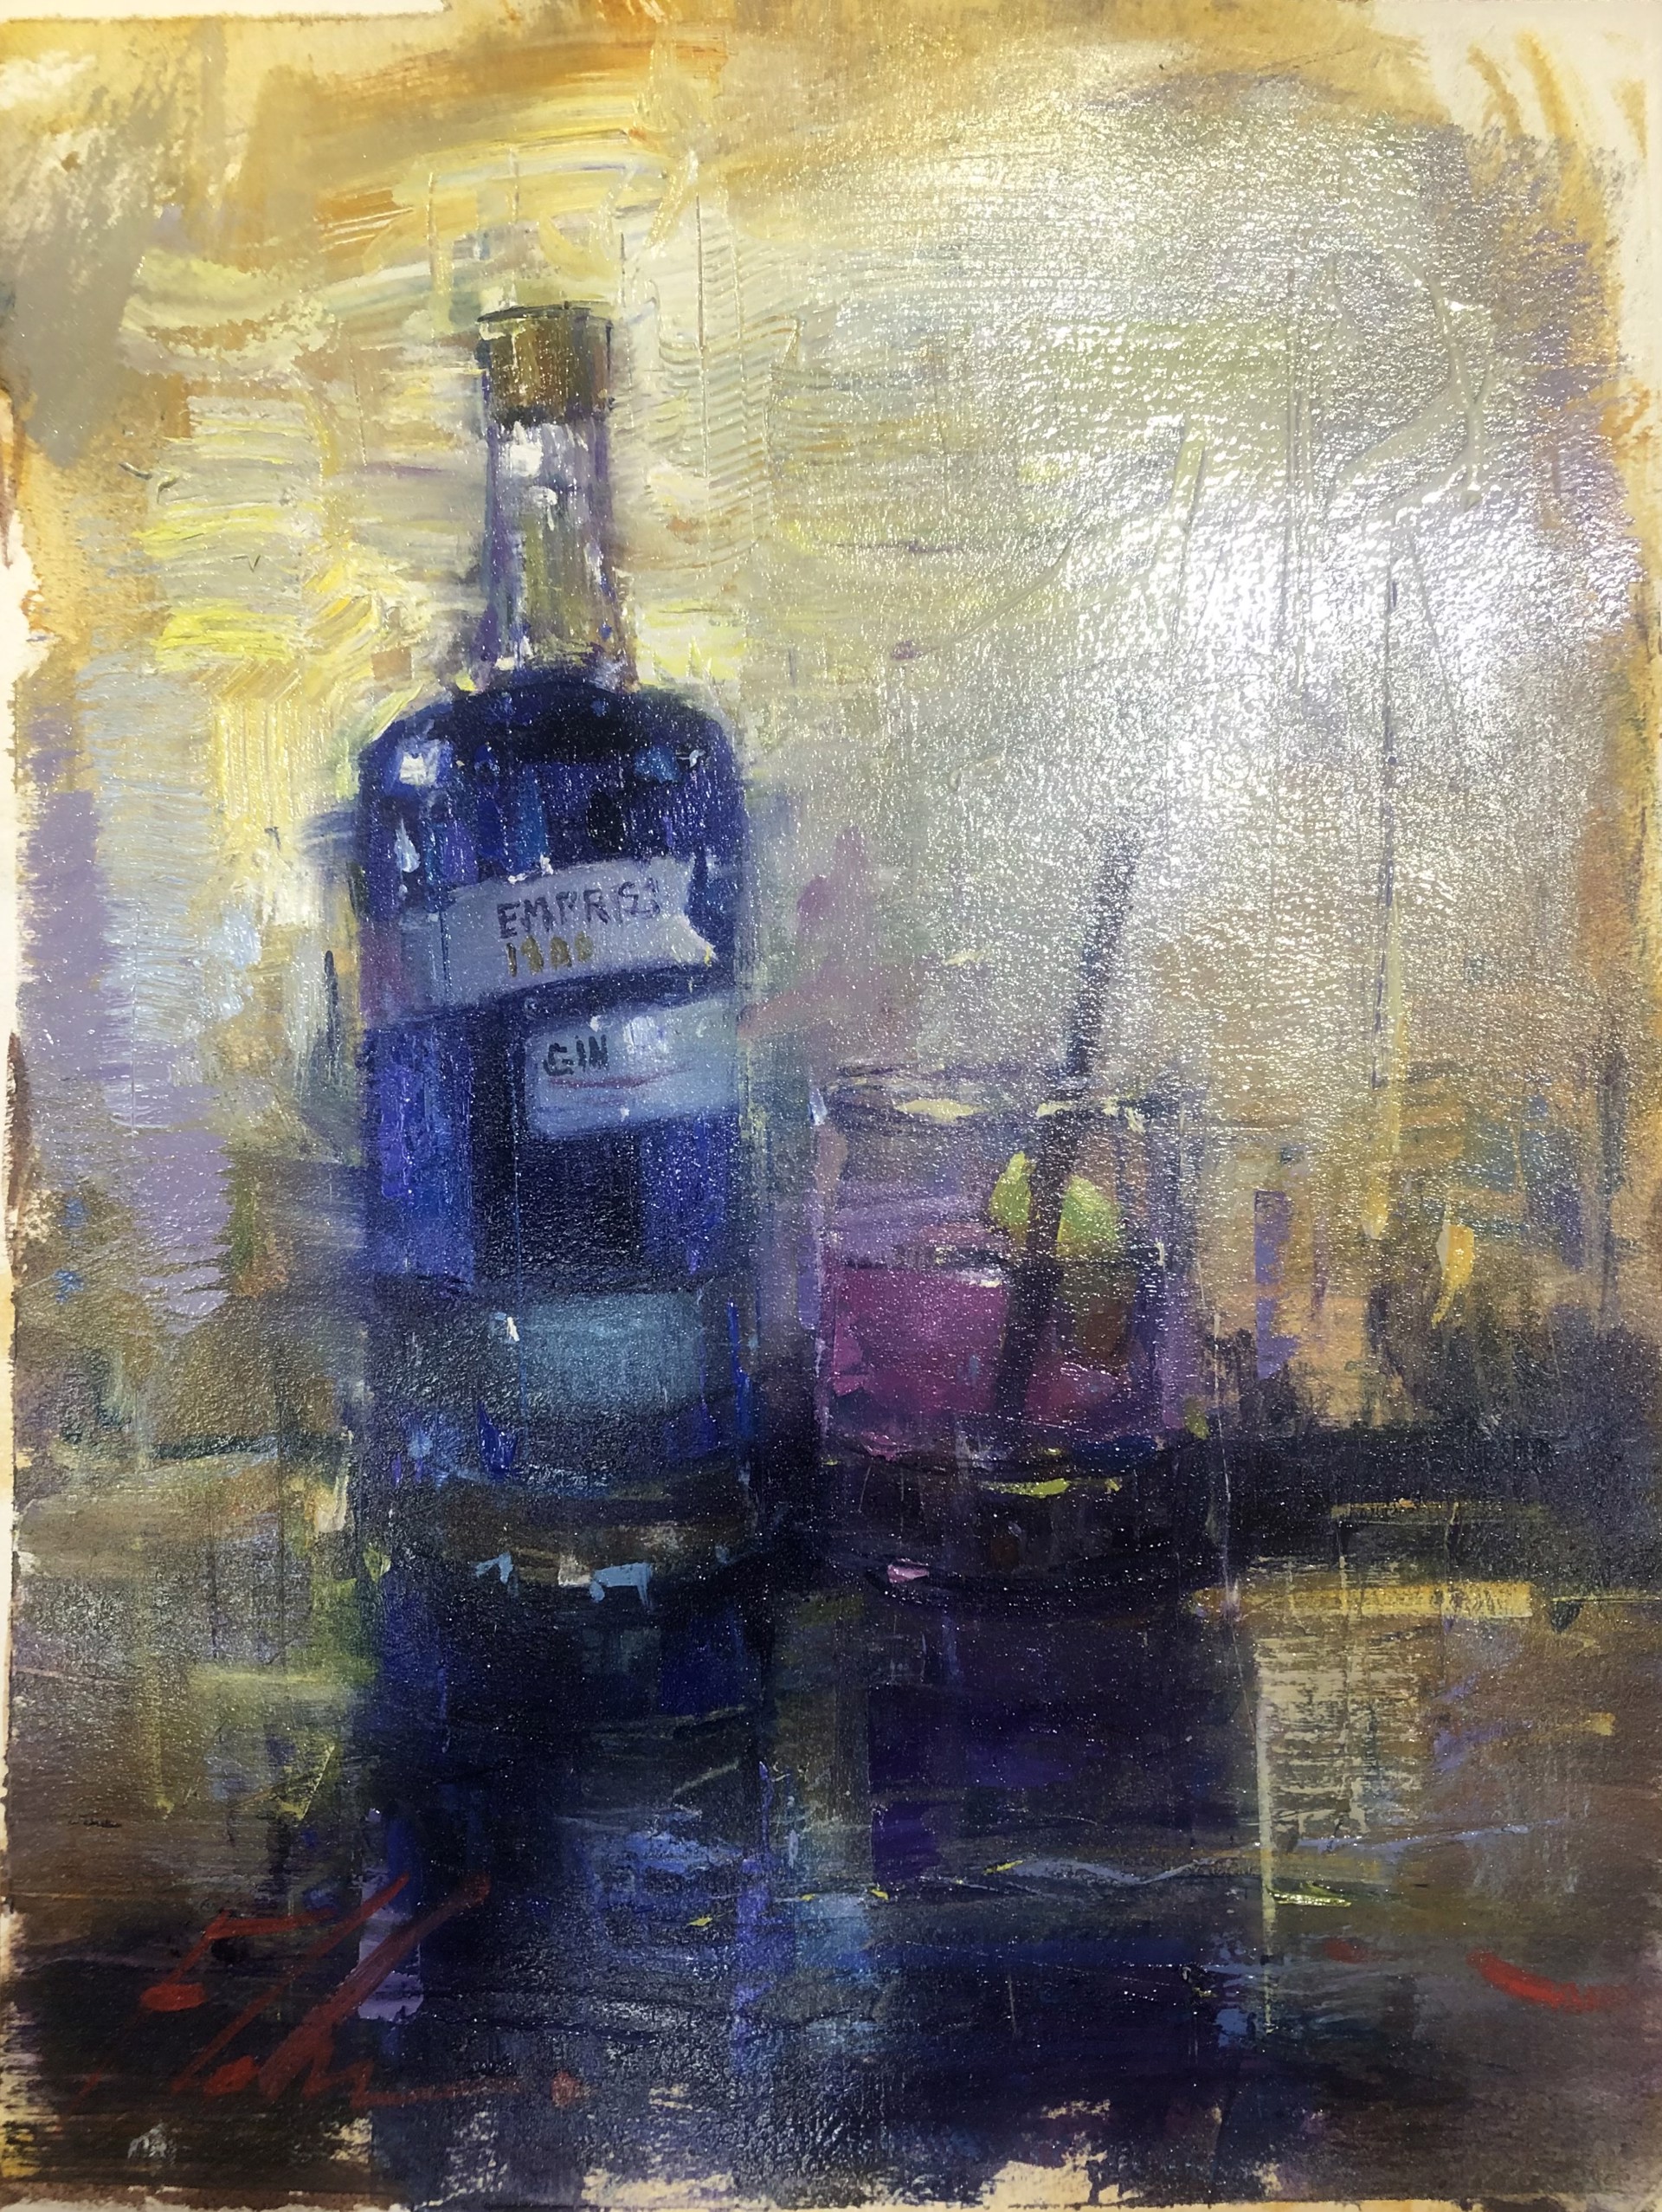 Untitled (Gin) by Michael Flohr